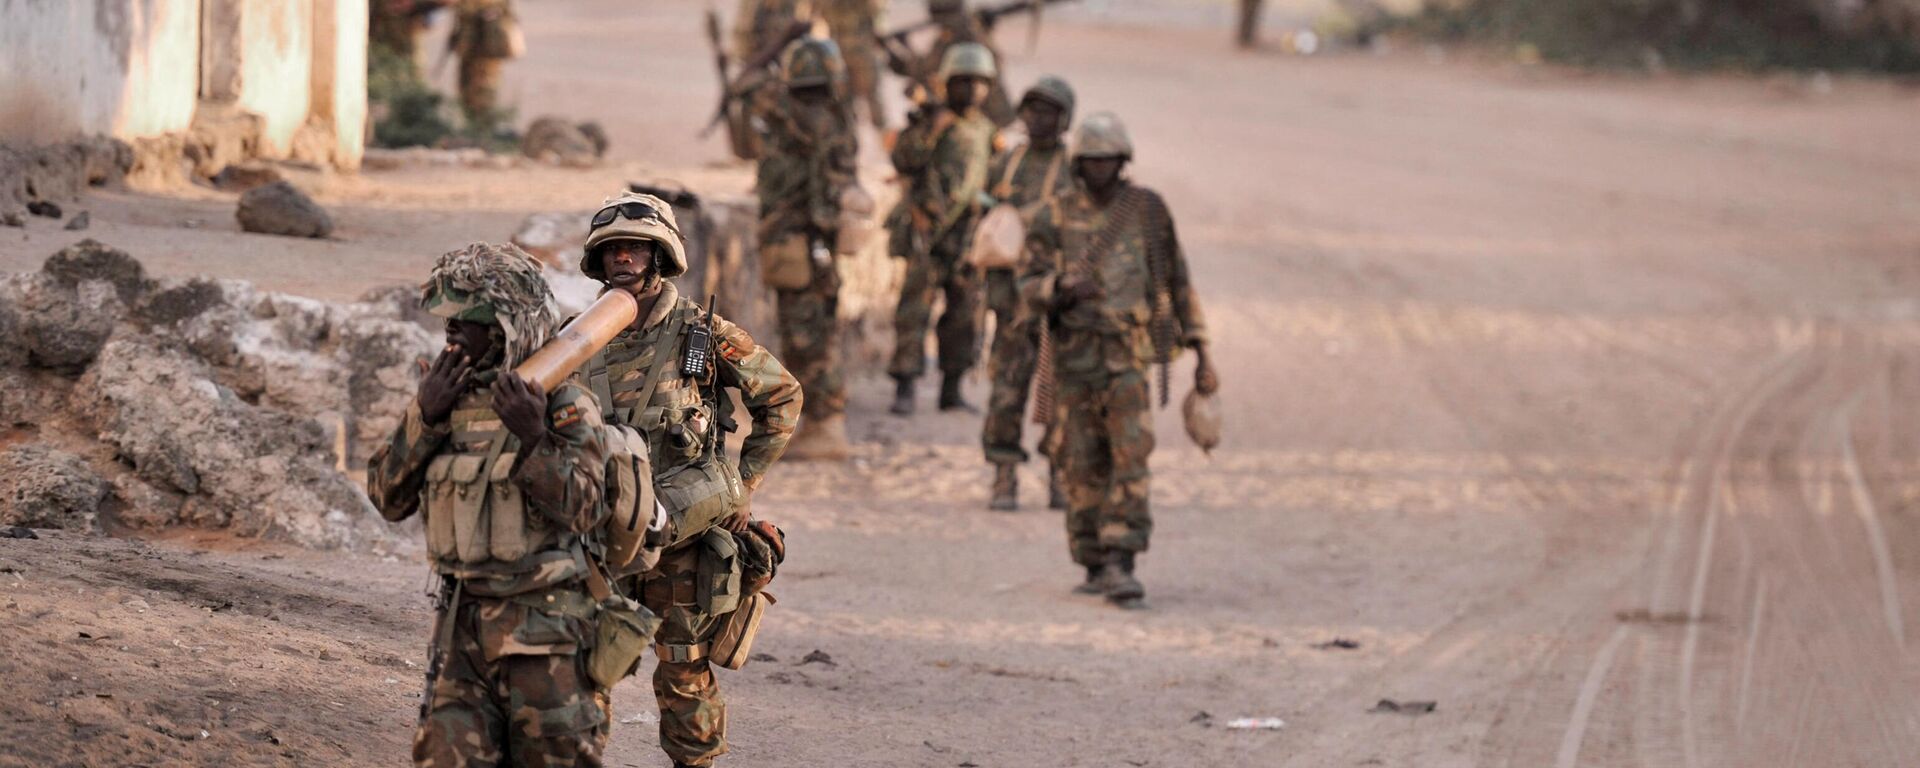 A handout image made available by the African Union Mission to Somalia (AMISOM) on October 6, 2014, shows soldiers belonging to the African Union Mission in Somalia, walking through the al-Shabab stronghold of Barawe, in the Lower Shabelle region of Somalia, 200 kilometers (120 miles) southwest of Mogadishu - Sputnik Africa, 1920, 05.07.2023